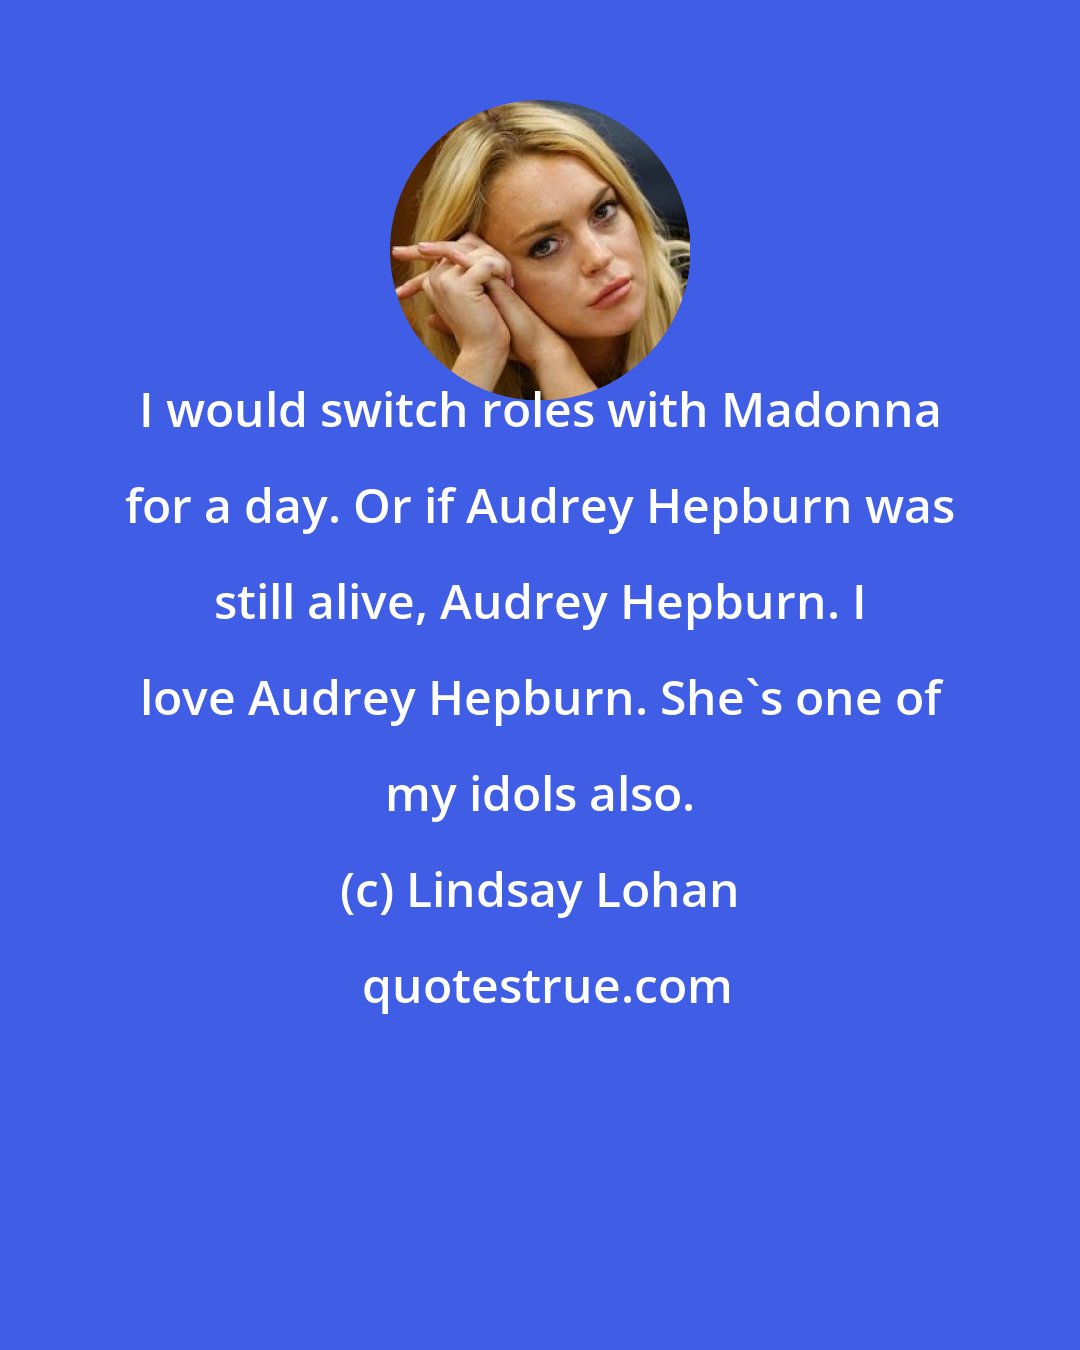 Lindsay Lohan: I would switch roles with Madonna for a day. Or if Audrey Hepburn was still alive, Audrey Hepburn. I love Audrey Hepburn. She's one of my idols also.